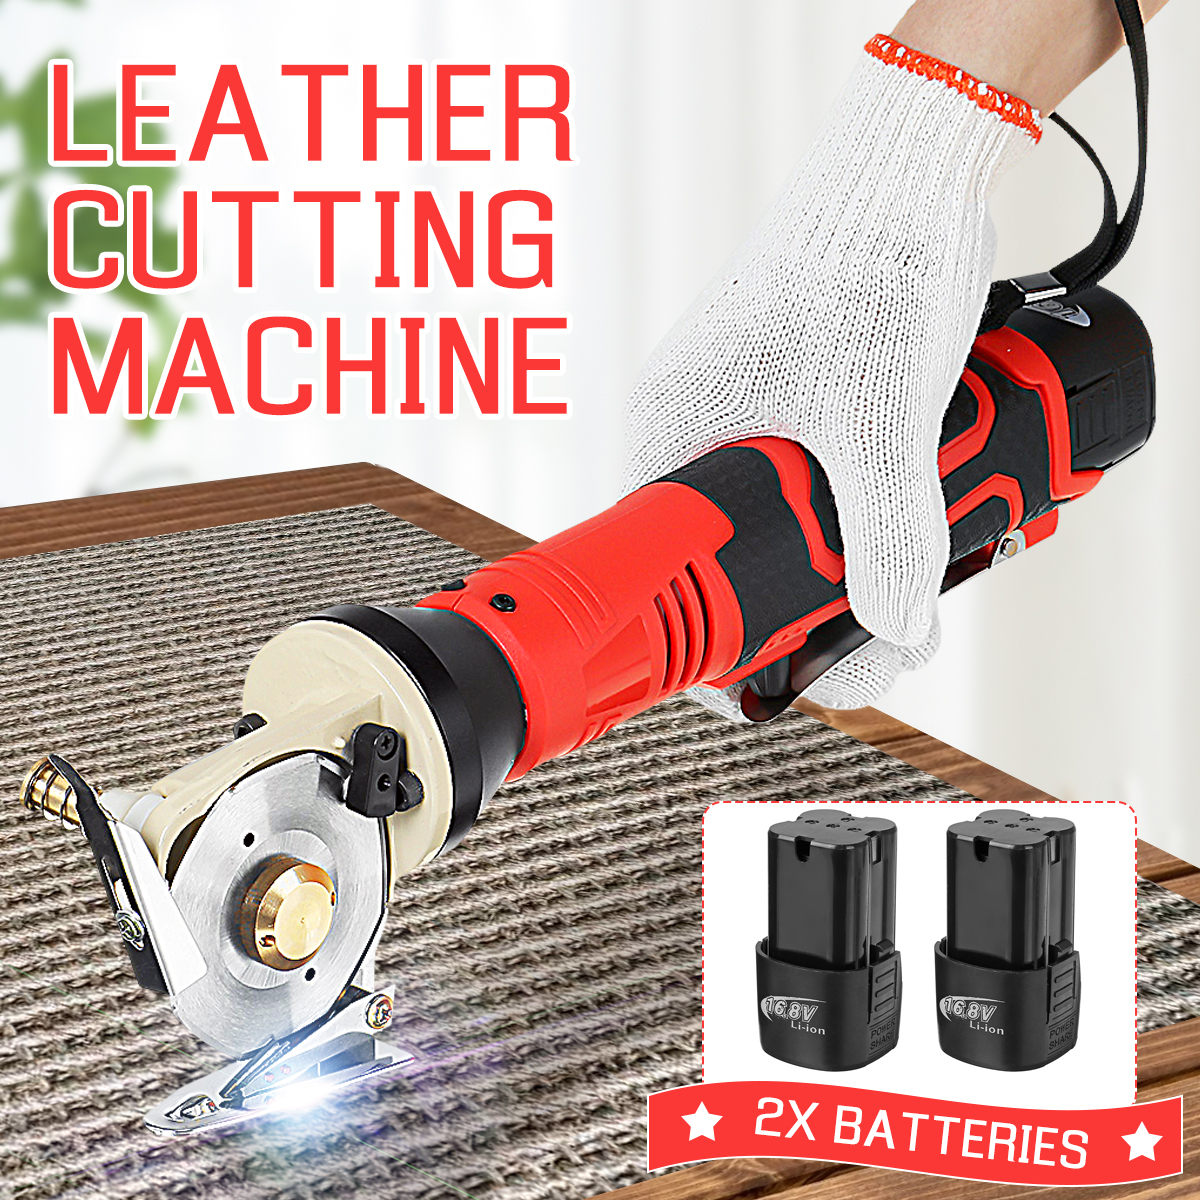 Cordless-Rechargeable-Electric-Cloth-Fabric-Cutting-Tools-Leather-Blanket-Electric-Cutter-Saws-Machi-1868912-1